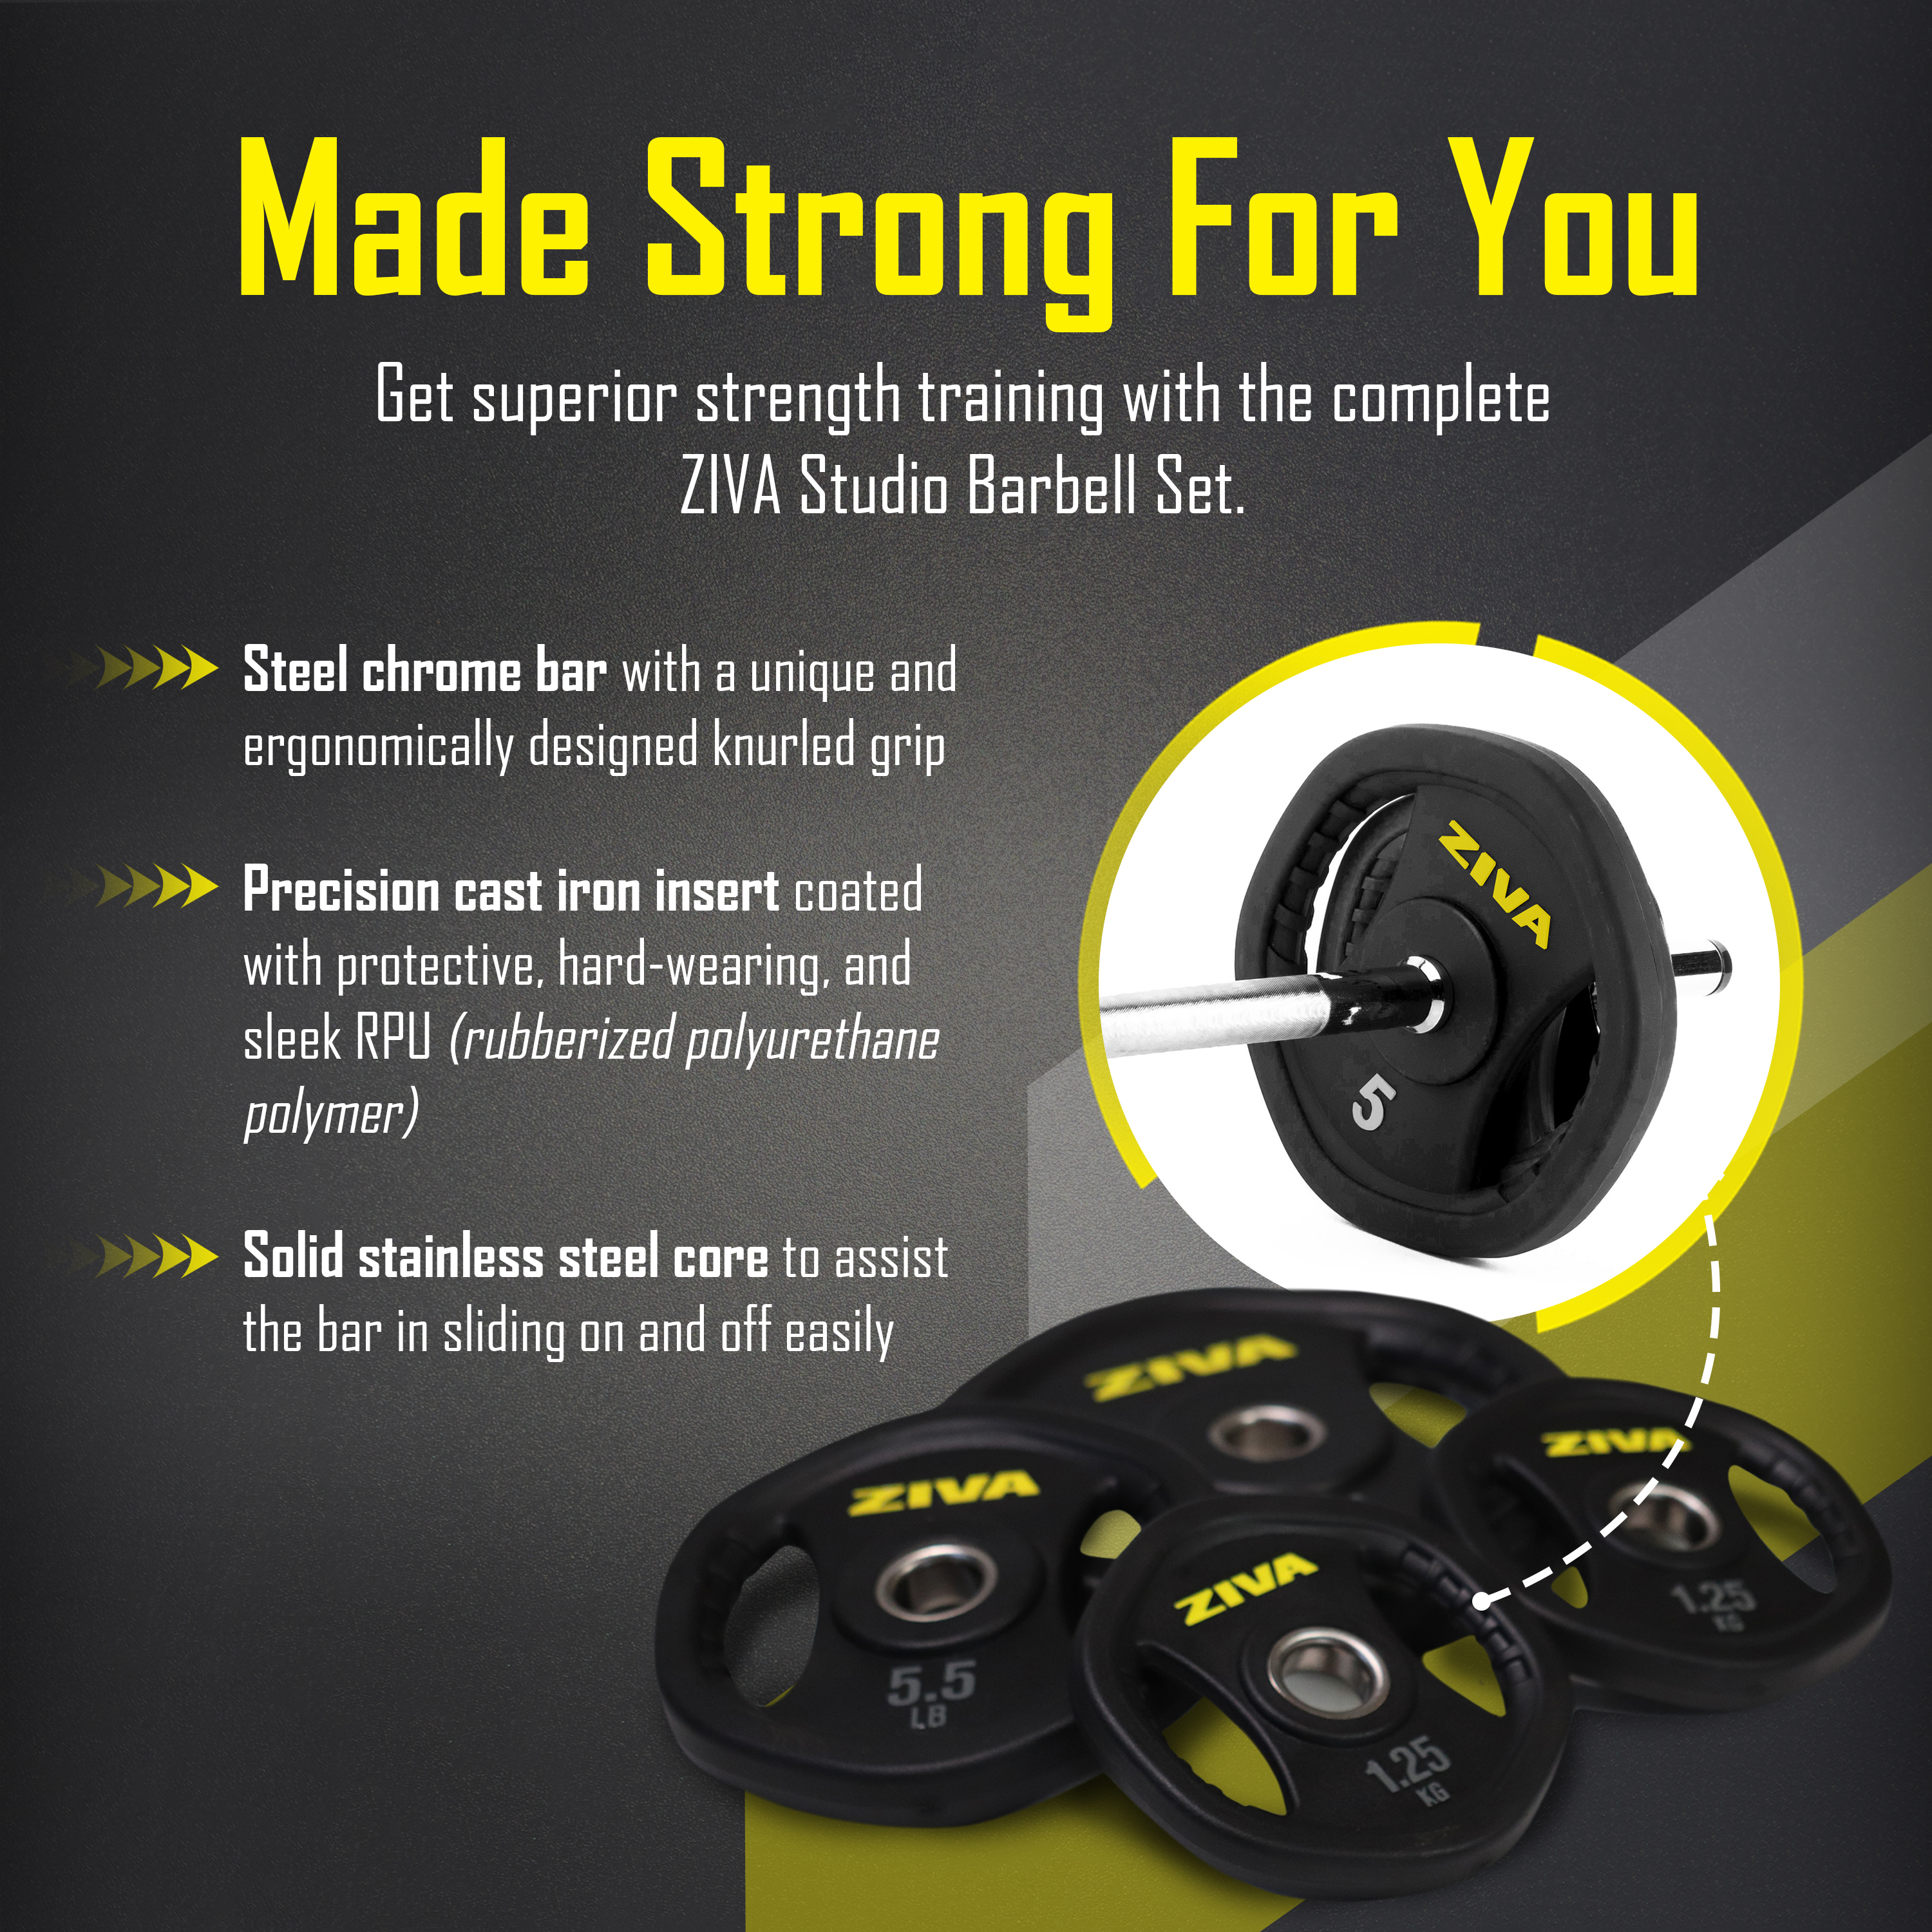 Made strong for you. Get superior strength training with the complete ZIVA studio barbell set. Steel chrome bar with a unique and ergonomically designed knurled grip. Precision cast iron insert coated with protective, hard-wearing, and sleek RPU (rubberized polyurethane polymer.) Solid stainless steel core to assist the bar in sliding on and off easily.